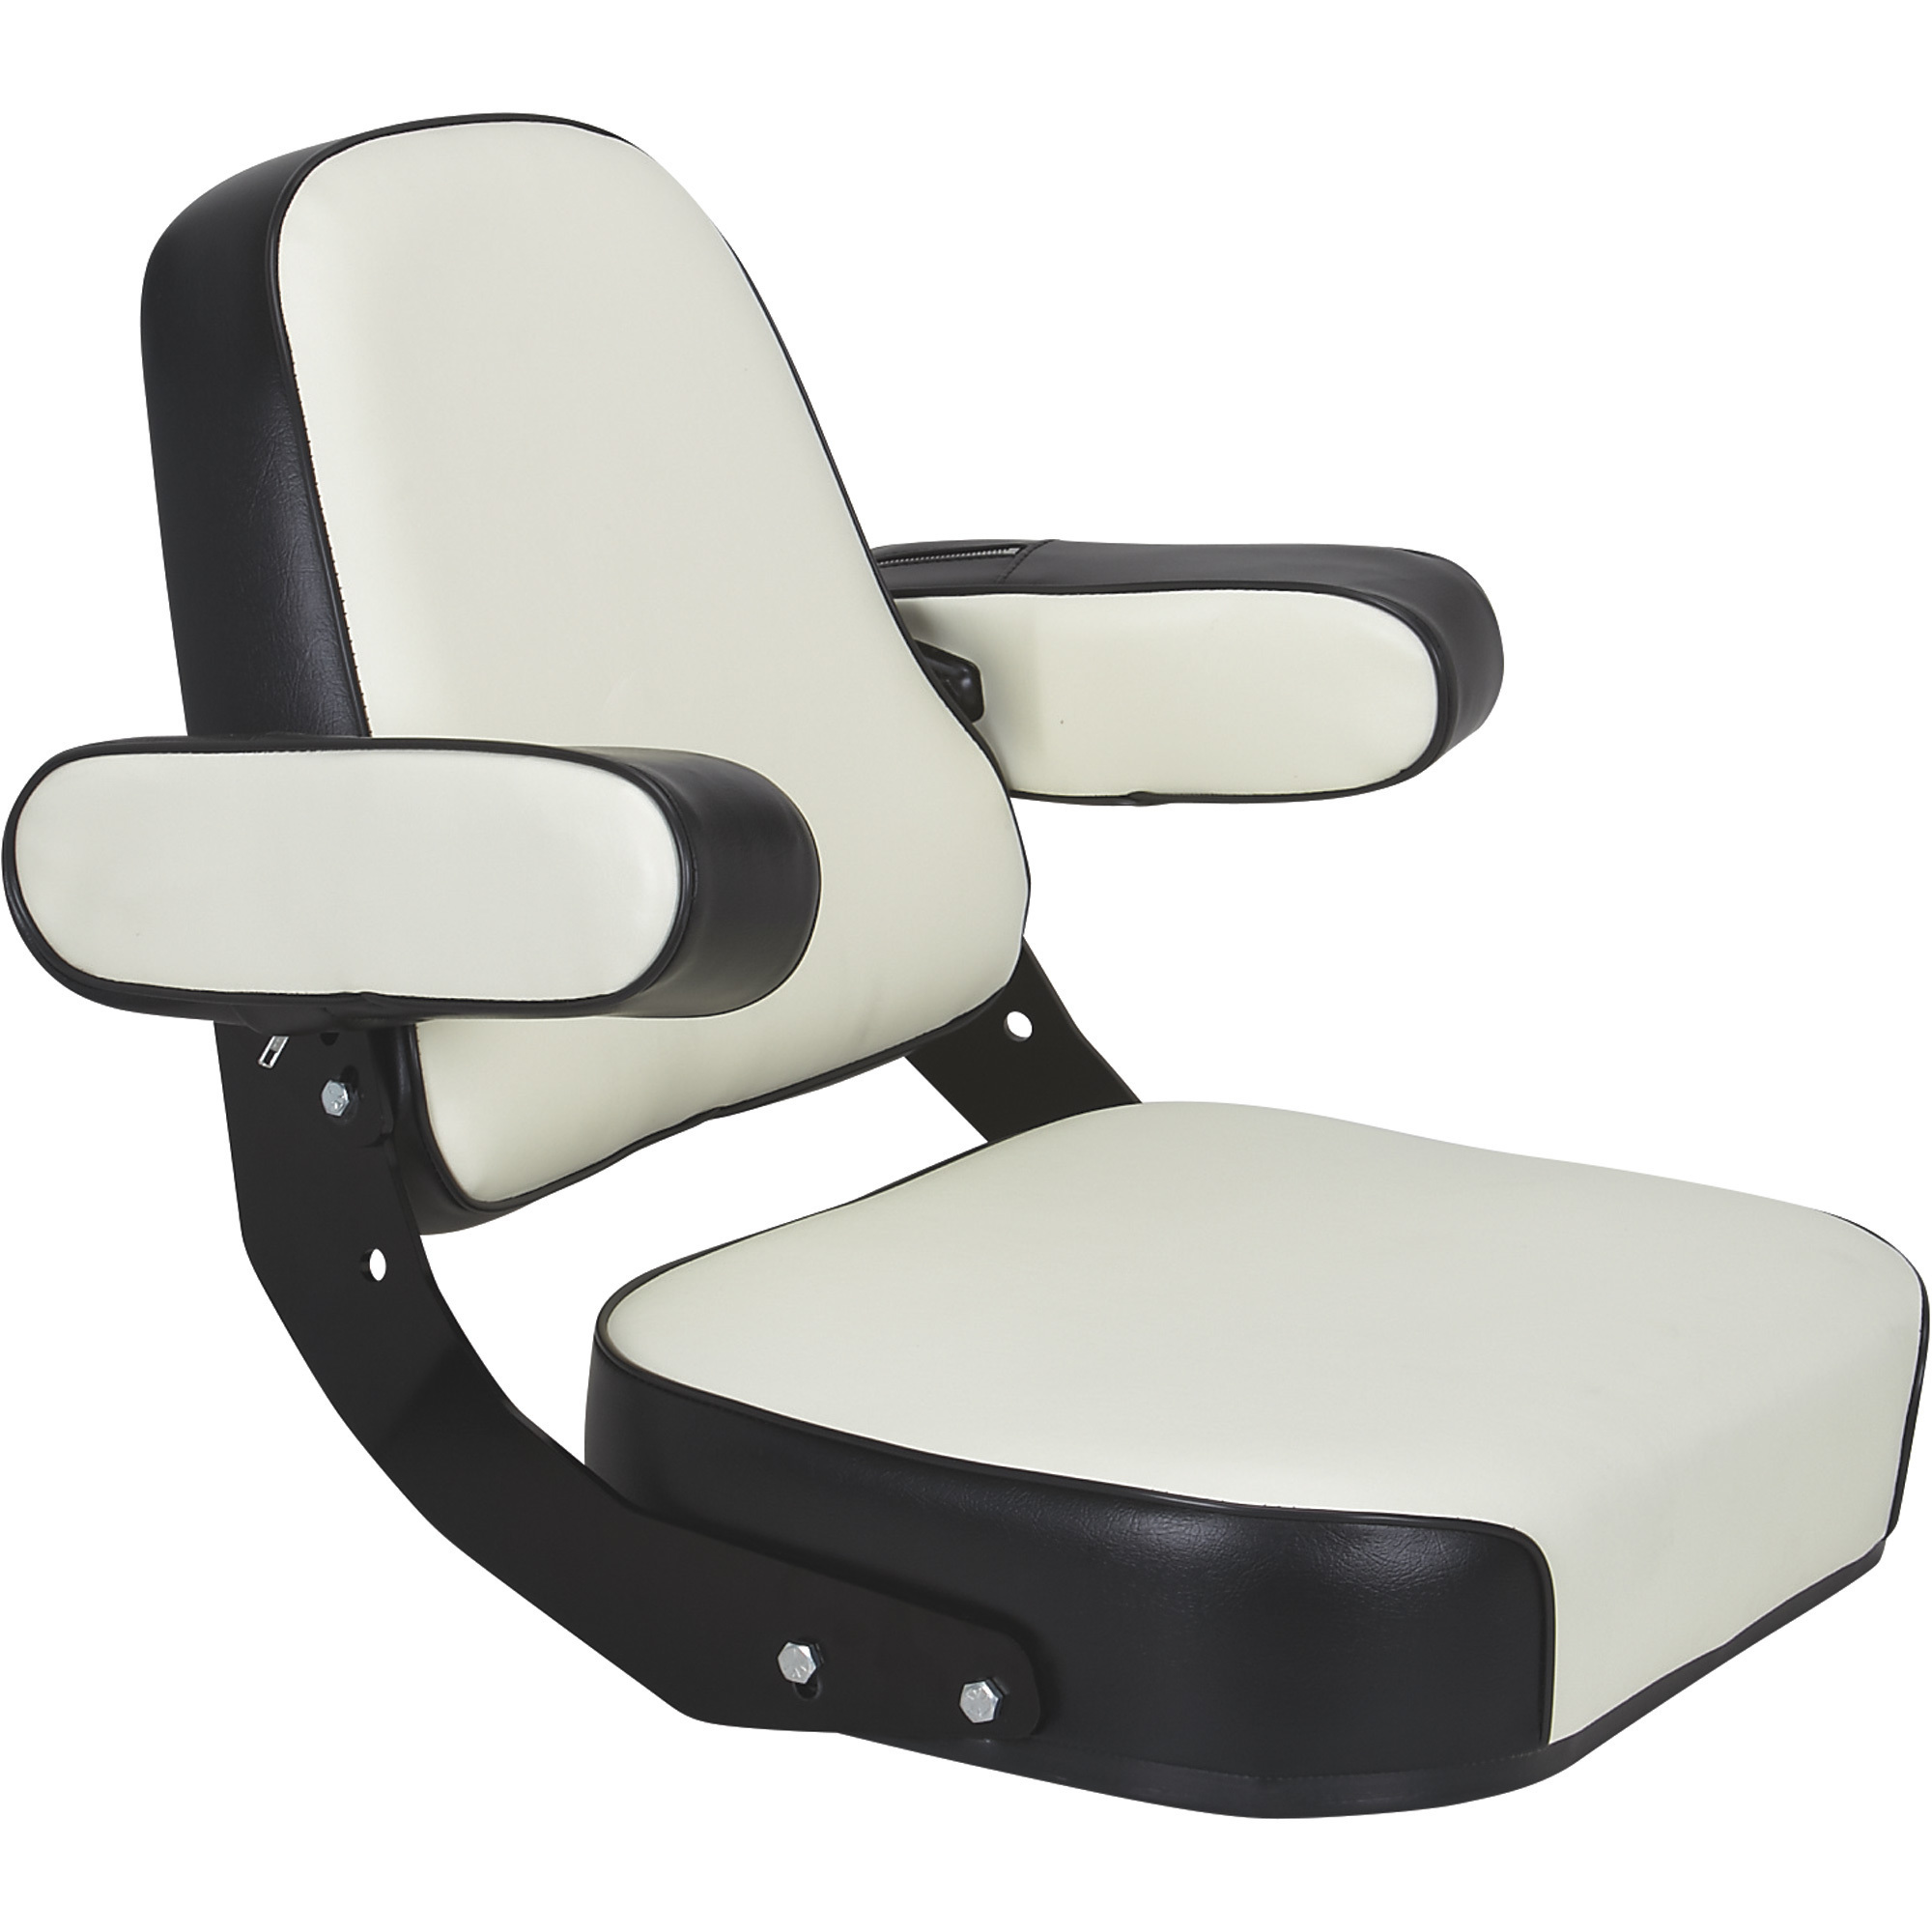 K & M Mfg Super Deluxe Seat Assembly for IH 06-66 Series Tractors, Black and White, Model 7163